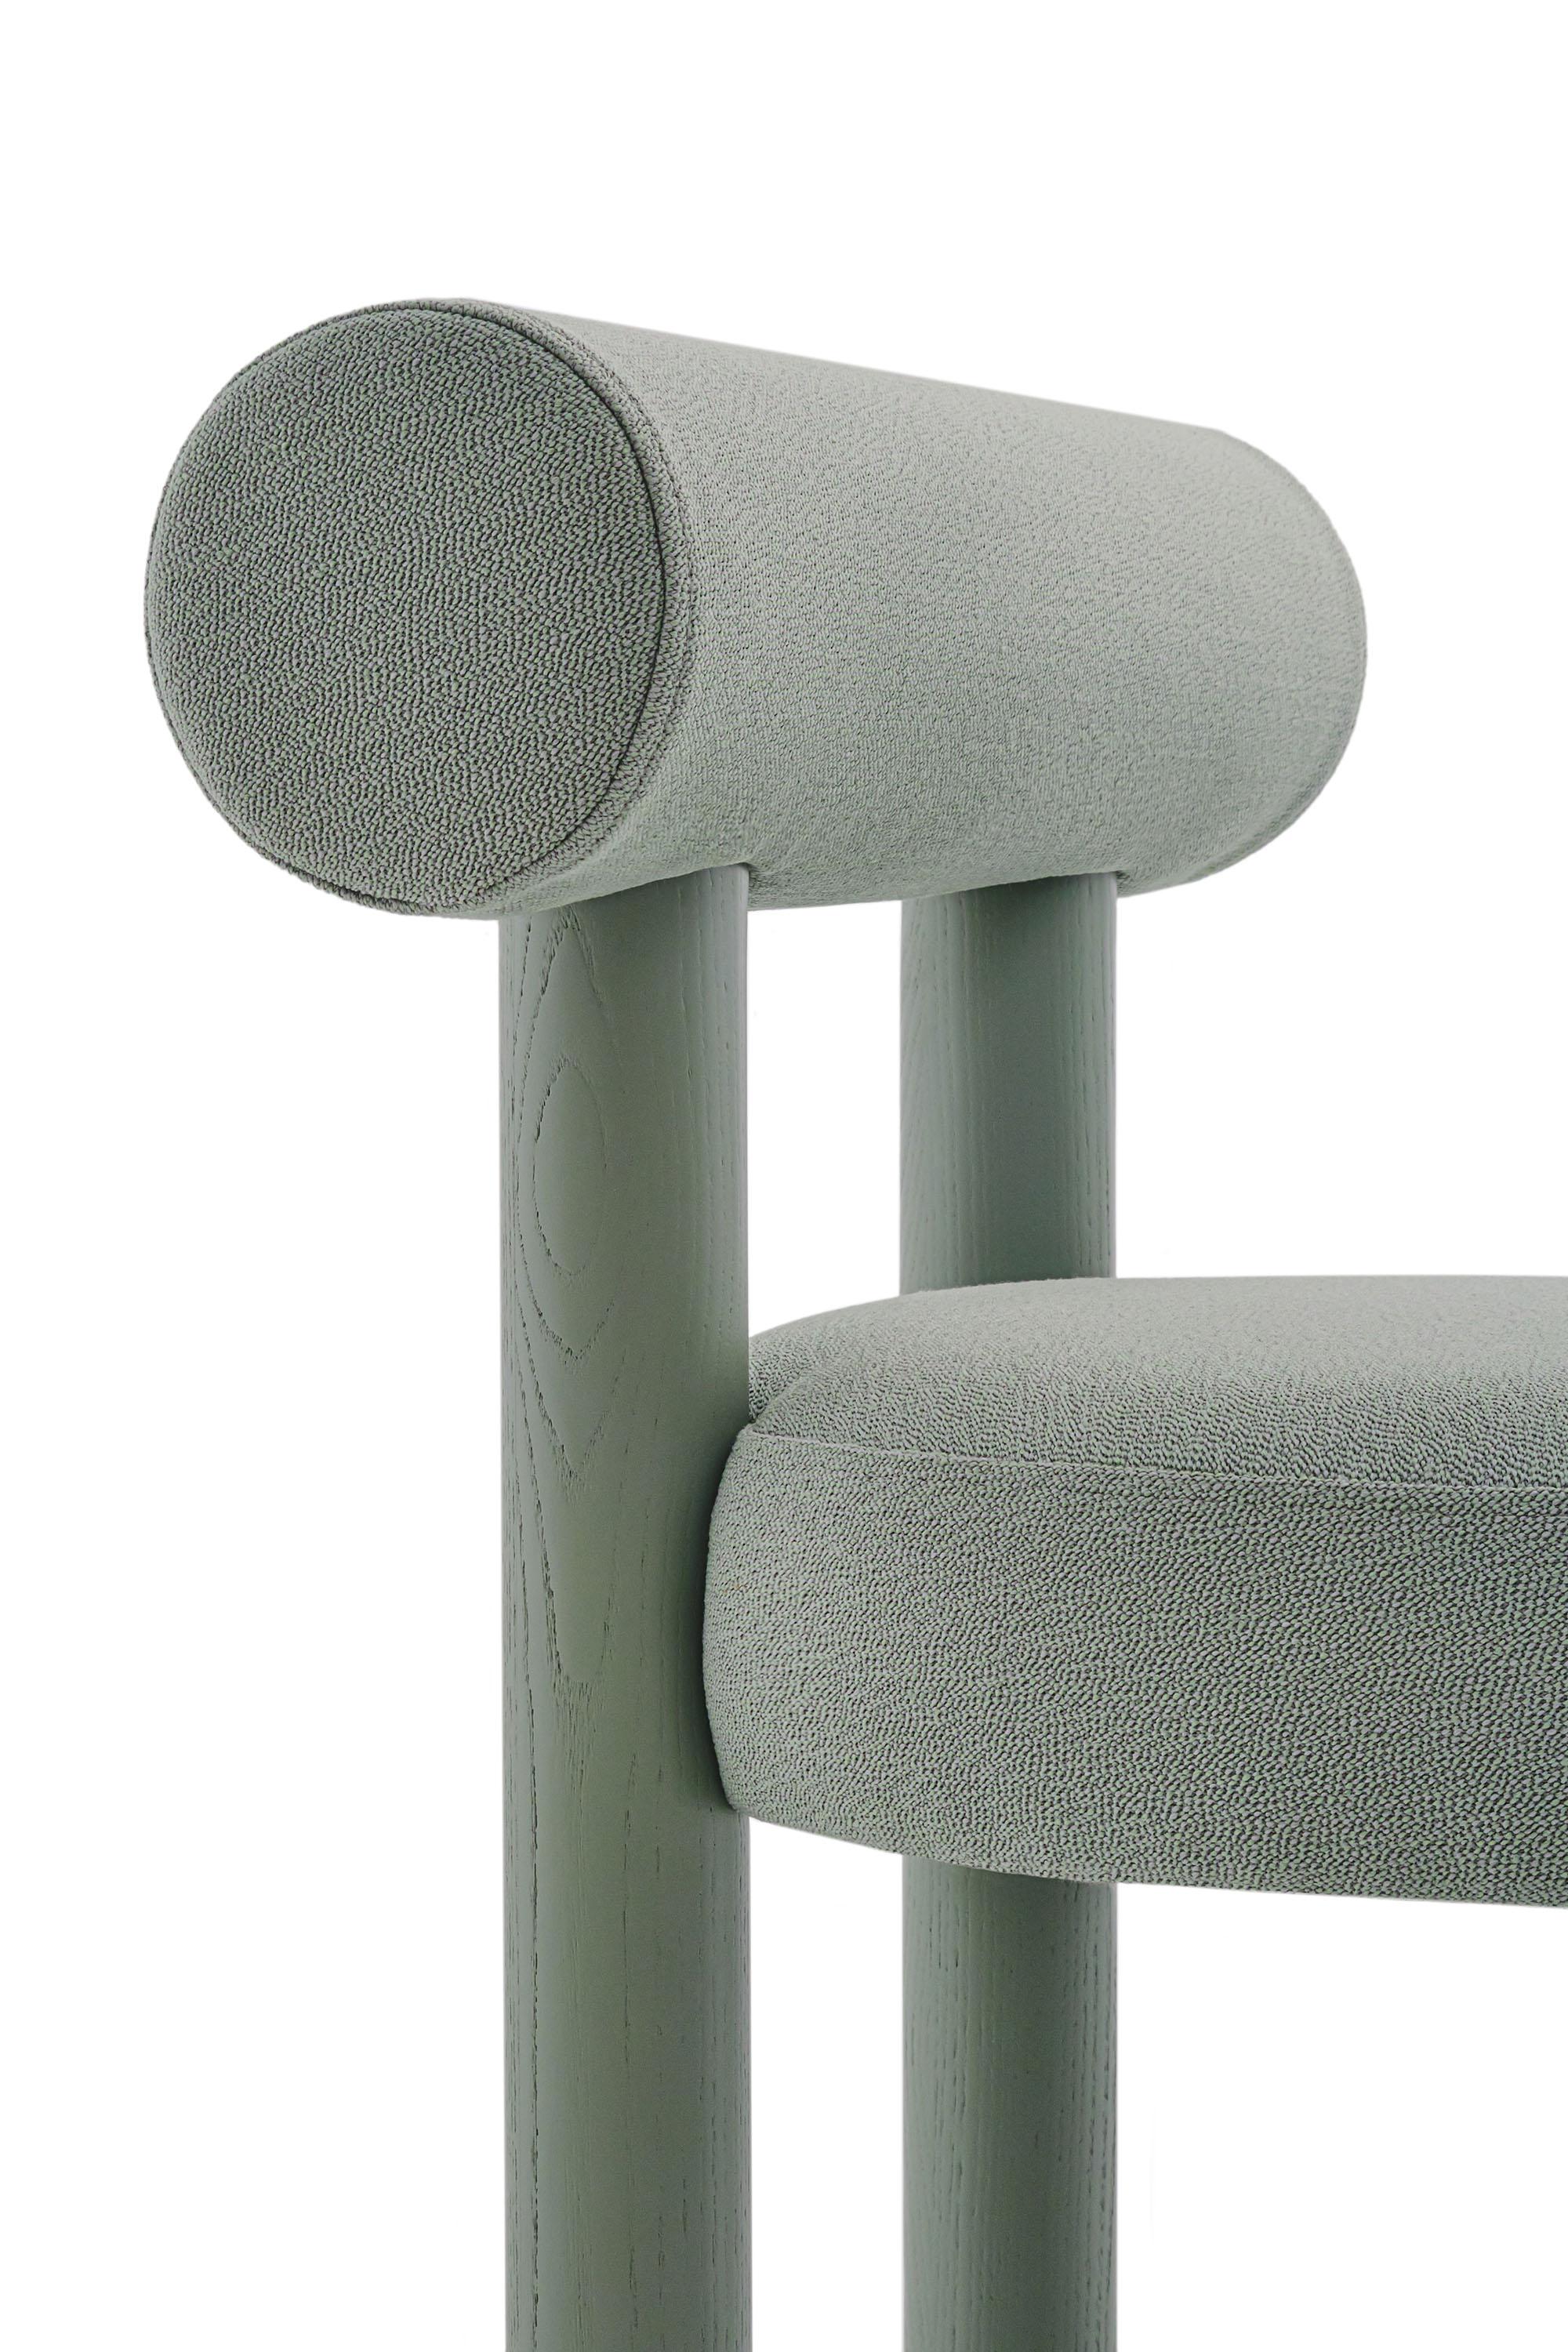 Modern Dining Chair Gropius CS2 in Wool Fabric with Wooden Legs by Noom 6